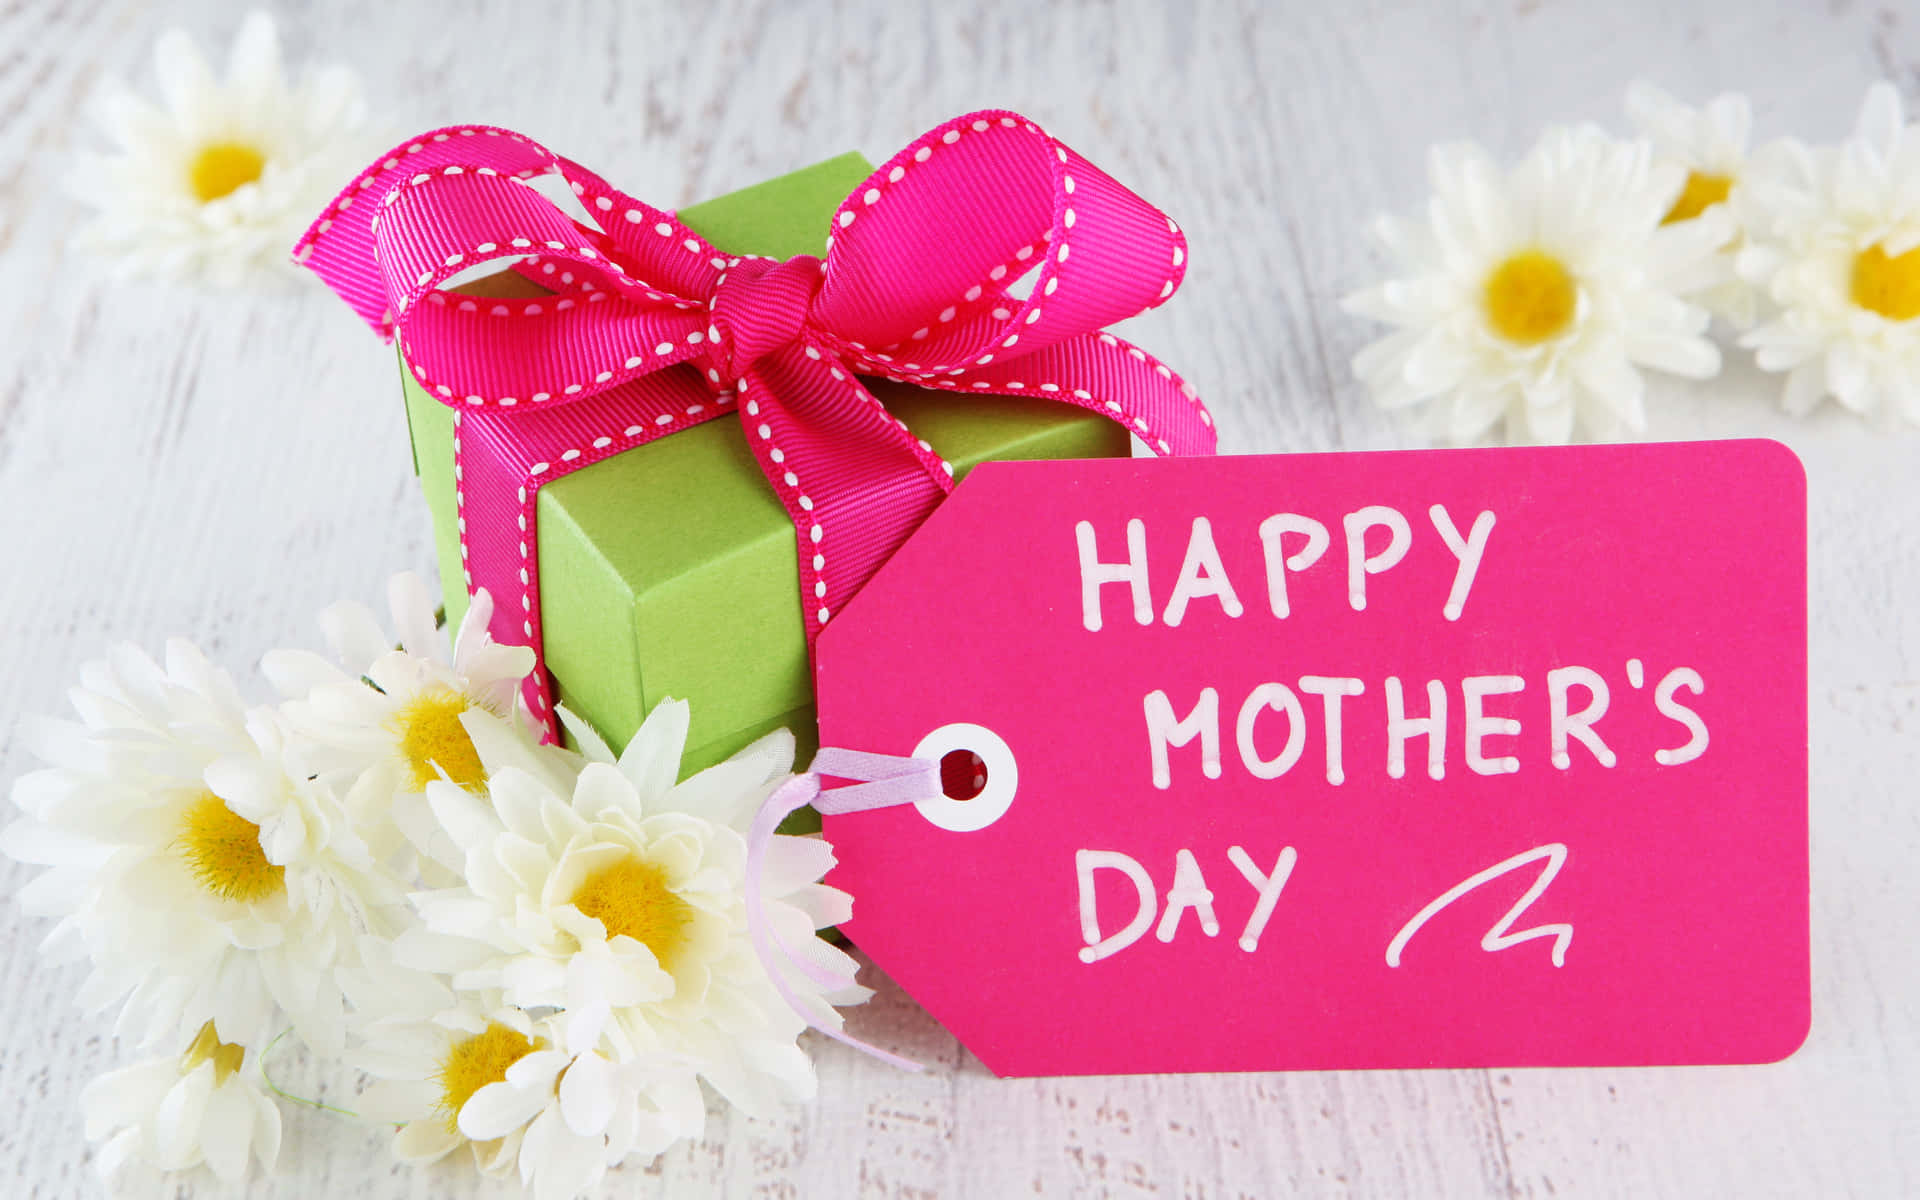 Happy Mothers Day Greetings Pink Green Box Hd Wallpaper